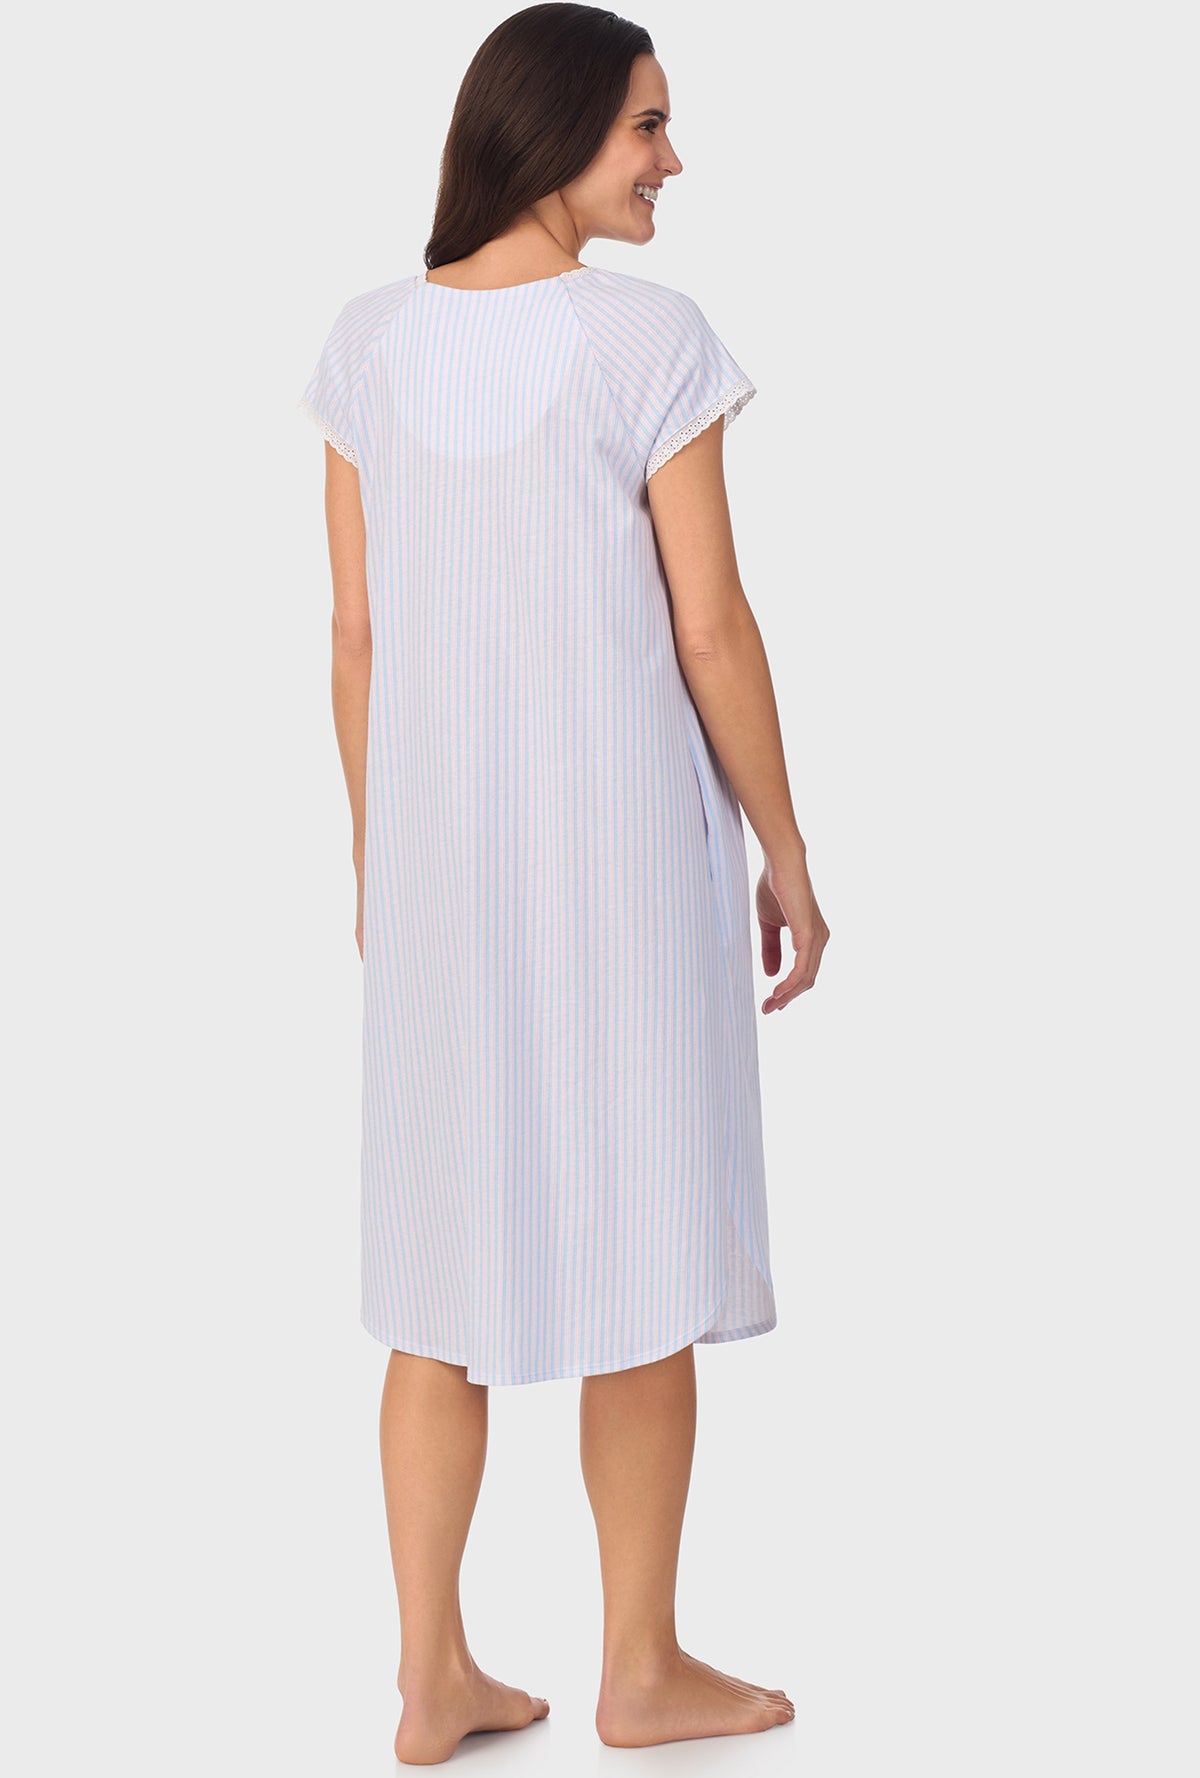 A lady wearing white short Sleeve Blossom Stripes Cap Sleeve Nightgown with Cotton Blue print